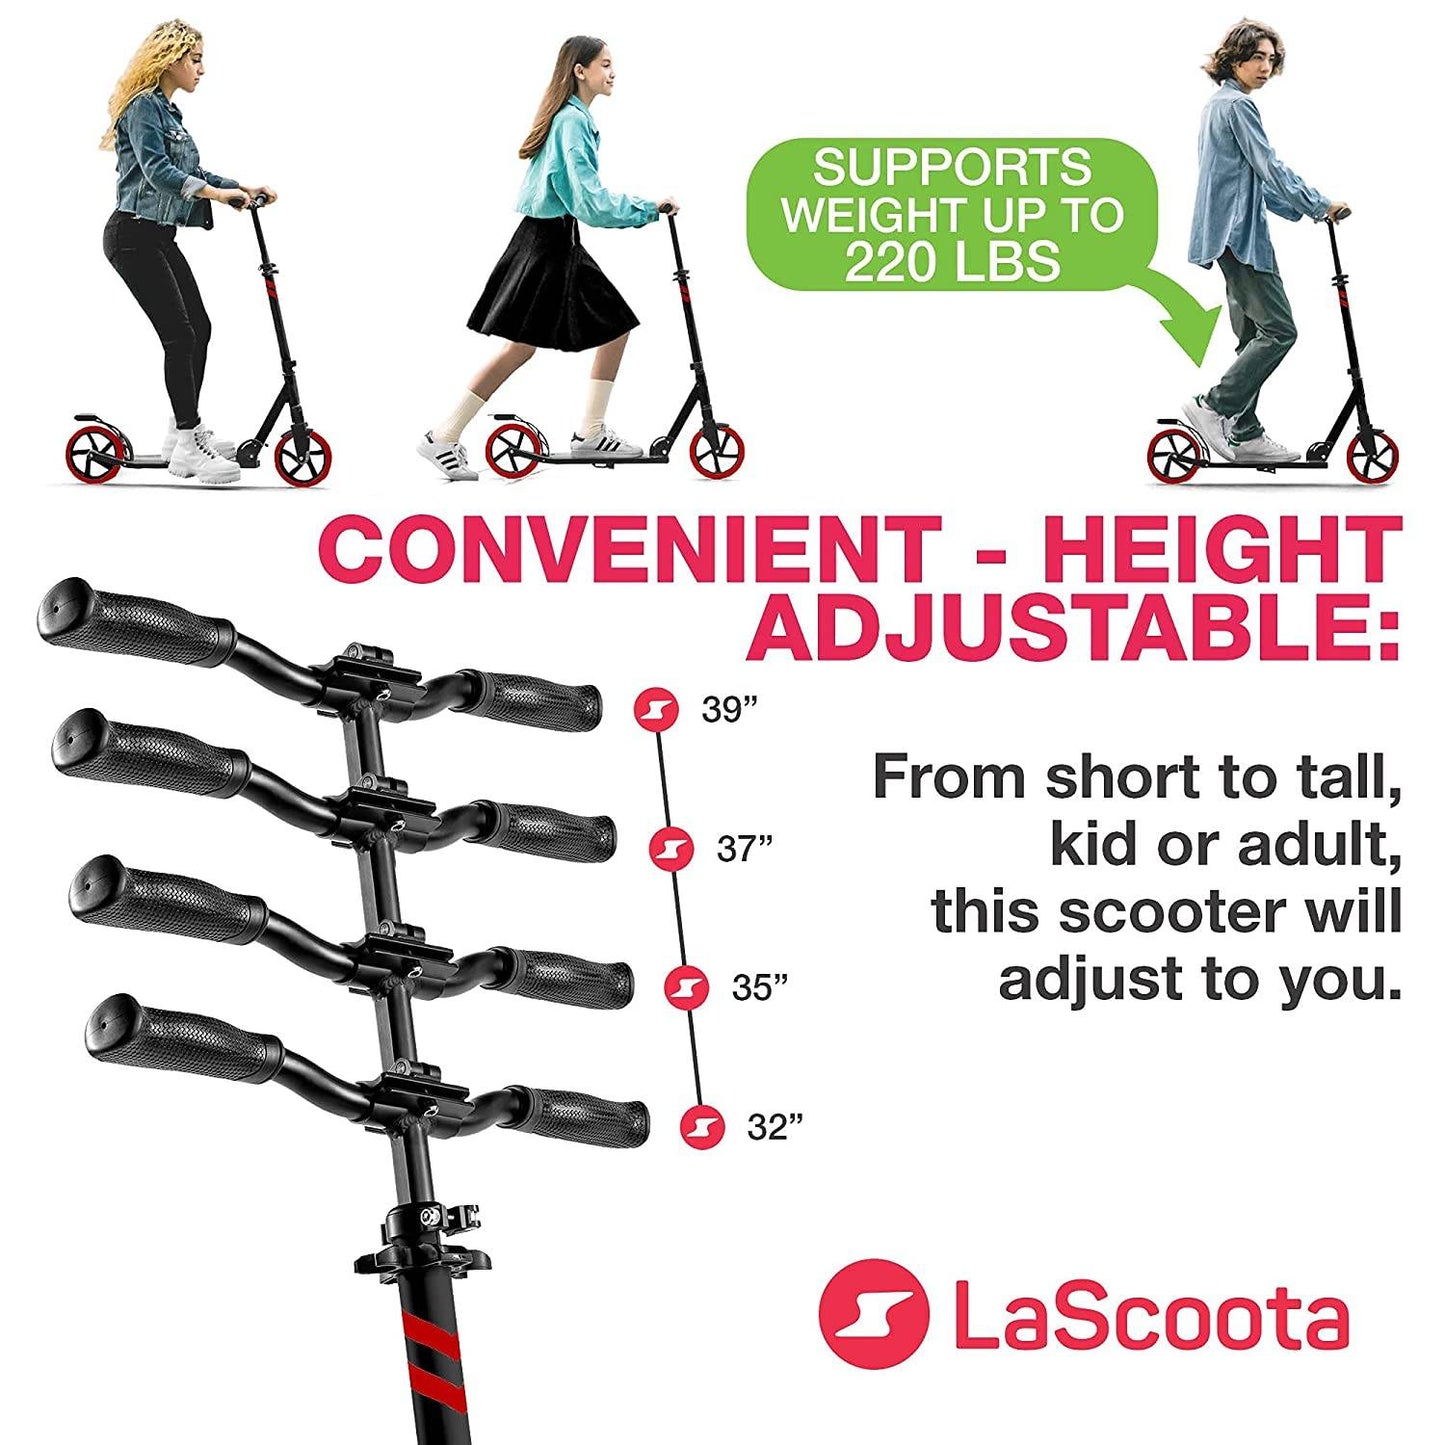 Lascoota Scooters for Kids 8 Years and up - Featuring Quick-Release Folding System - Dual Suspension System + Scooter Shoulder Strap 7.9" Big Wheels Great Scooters for Adults and Teens - Hatke